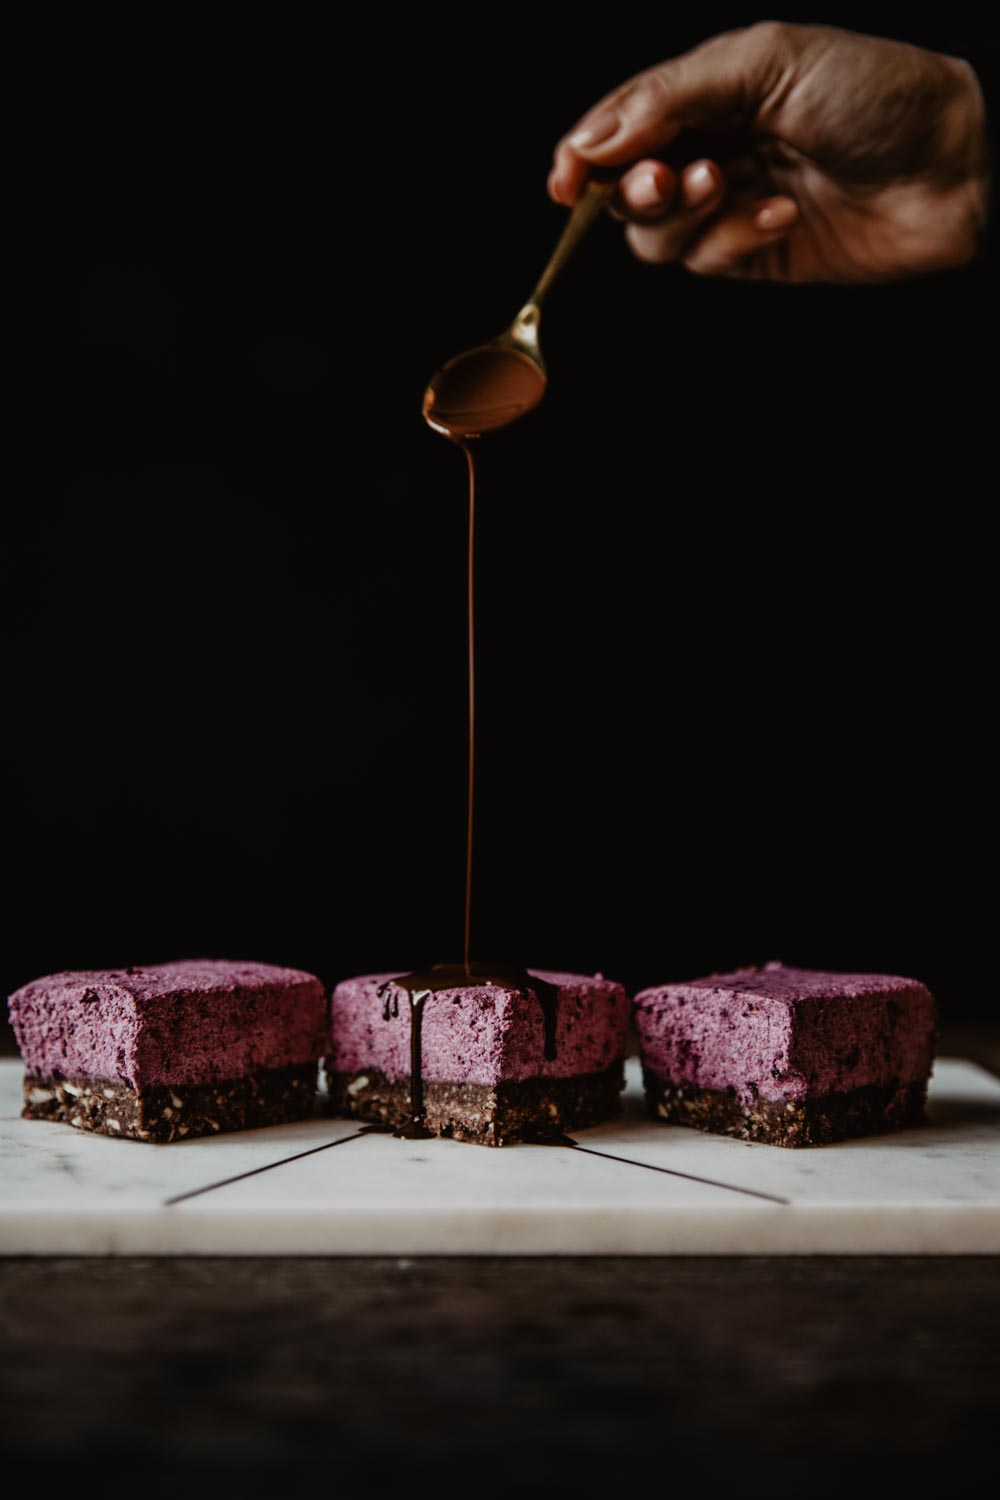 Vegan Berry Cheesecake & facts about my nutrition | You Rock My Life